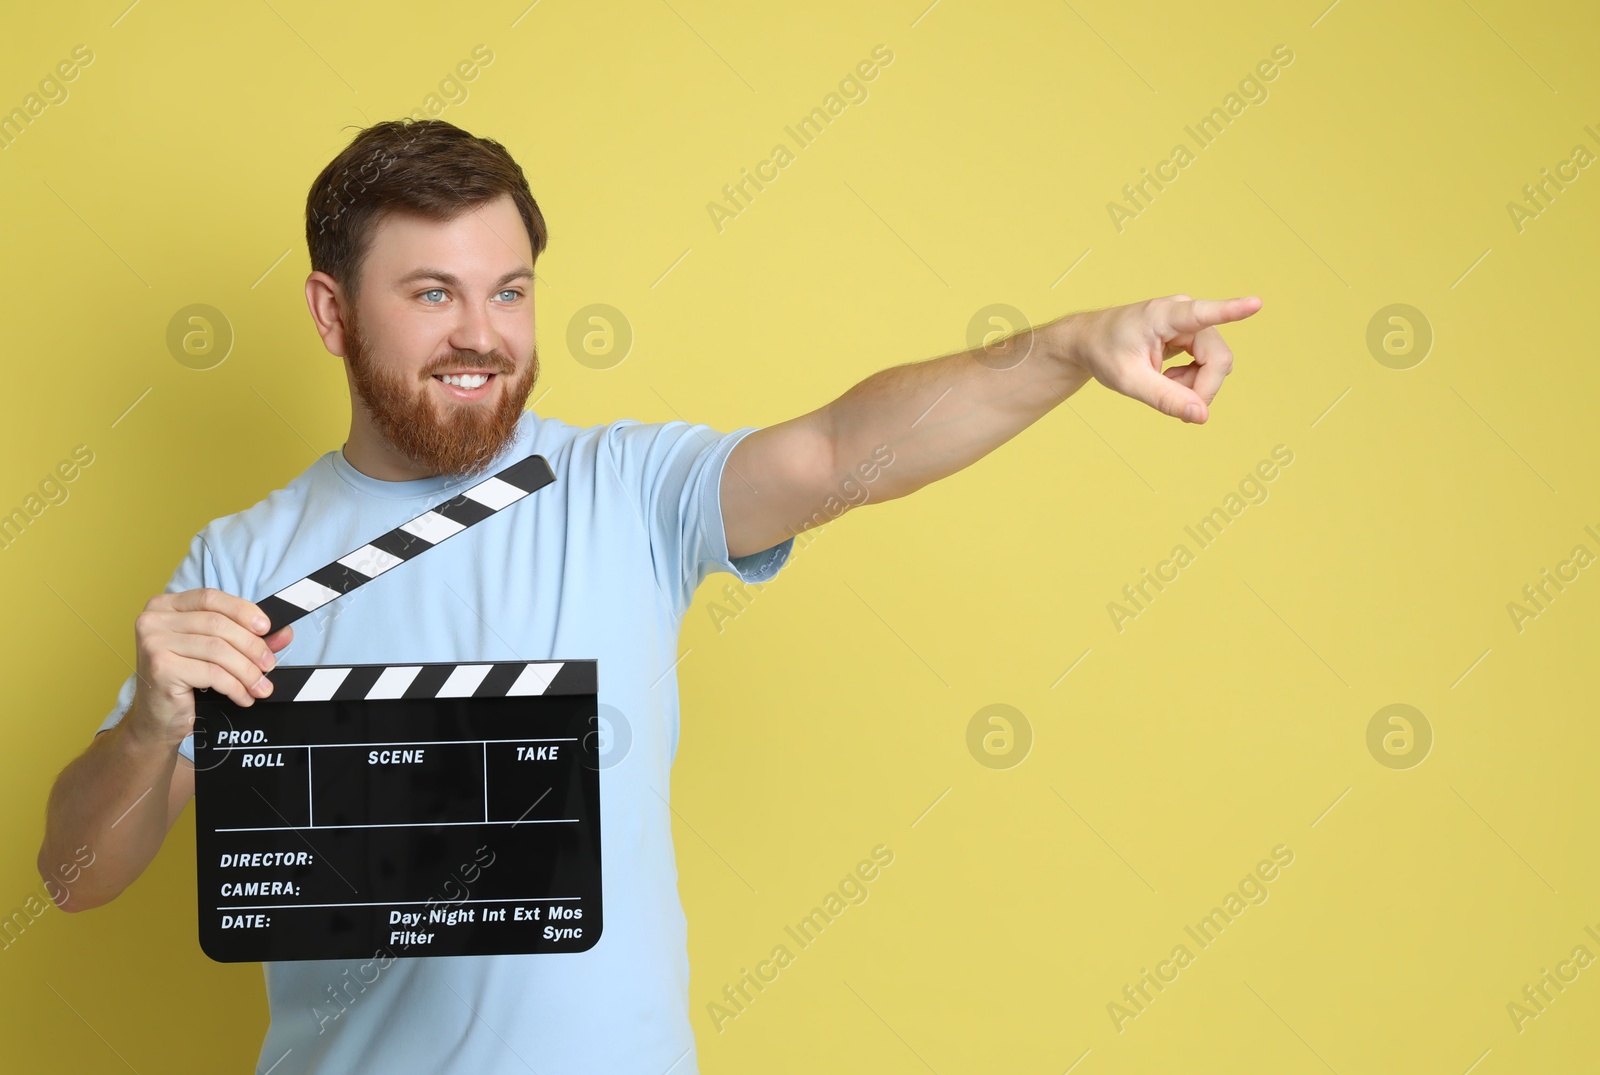 Photo of Making movie. Smiling man with clapperboard pointing at something on yellow background. Space for text